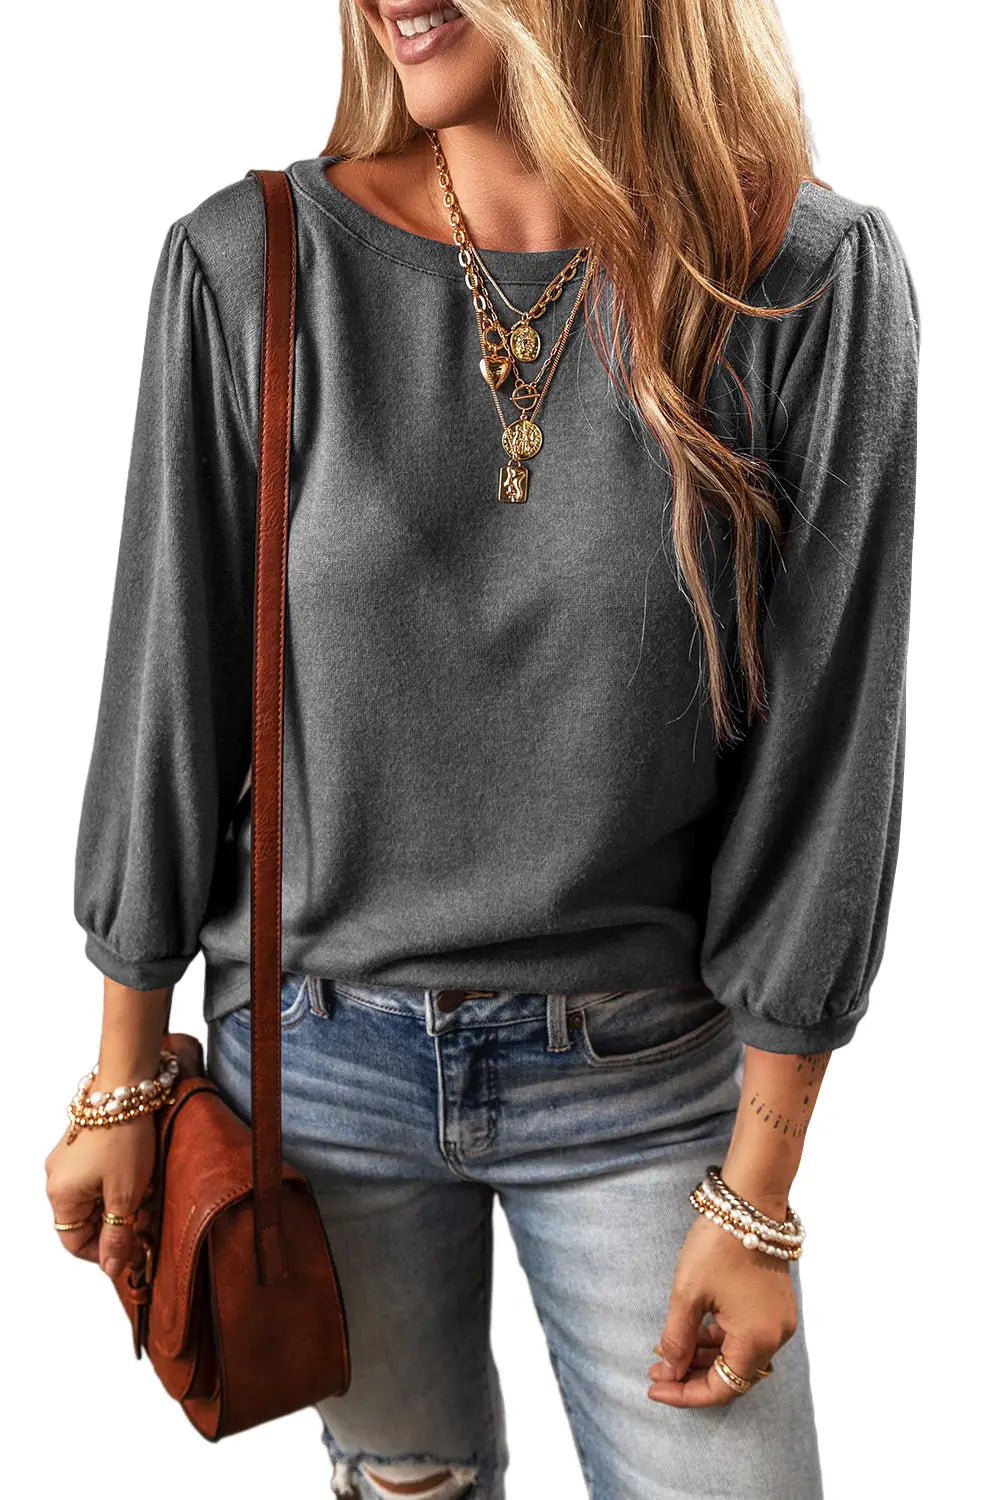 Medium grey solid color 3/4 sleeve round neck blouse - long tops